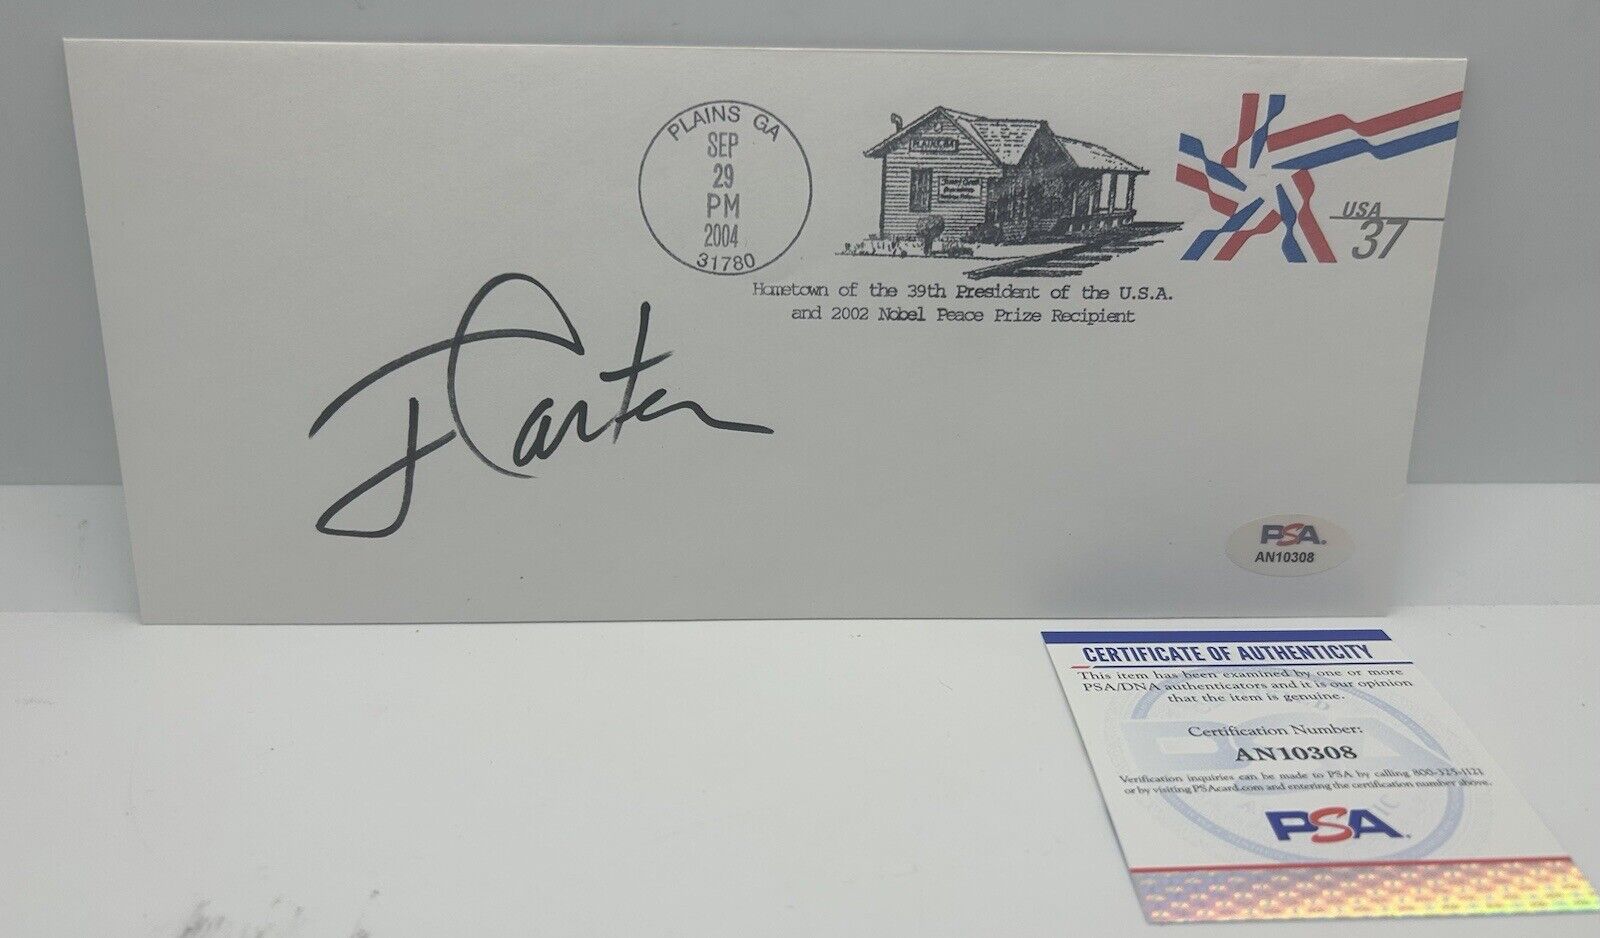 Jimmy Carter Signed 2004 Plains First Day Cover POTUS Autographed PSA/DNA COA